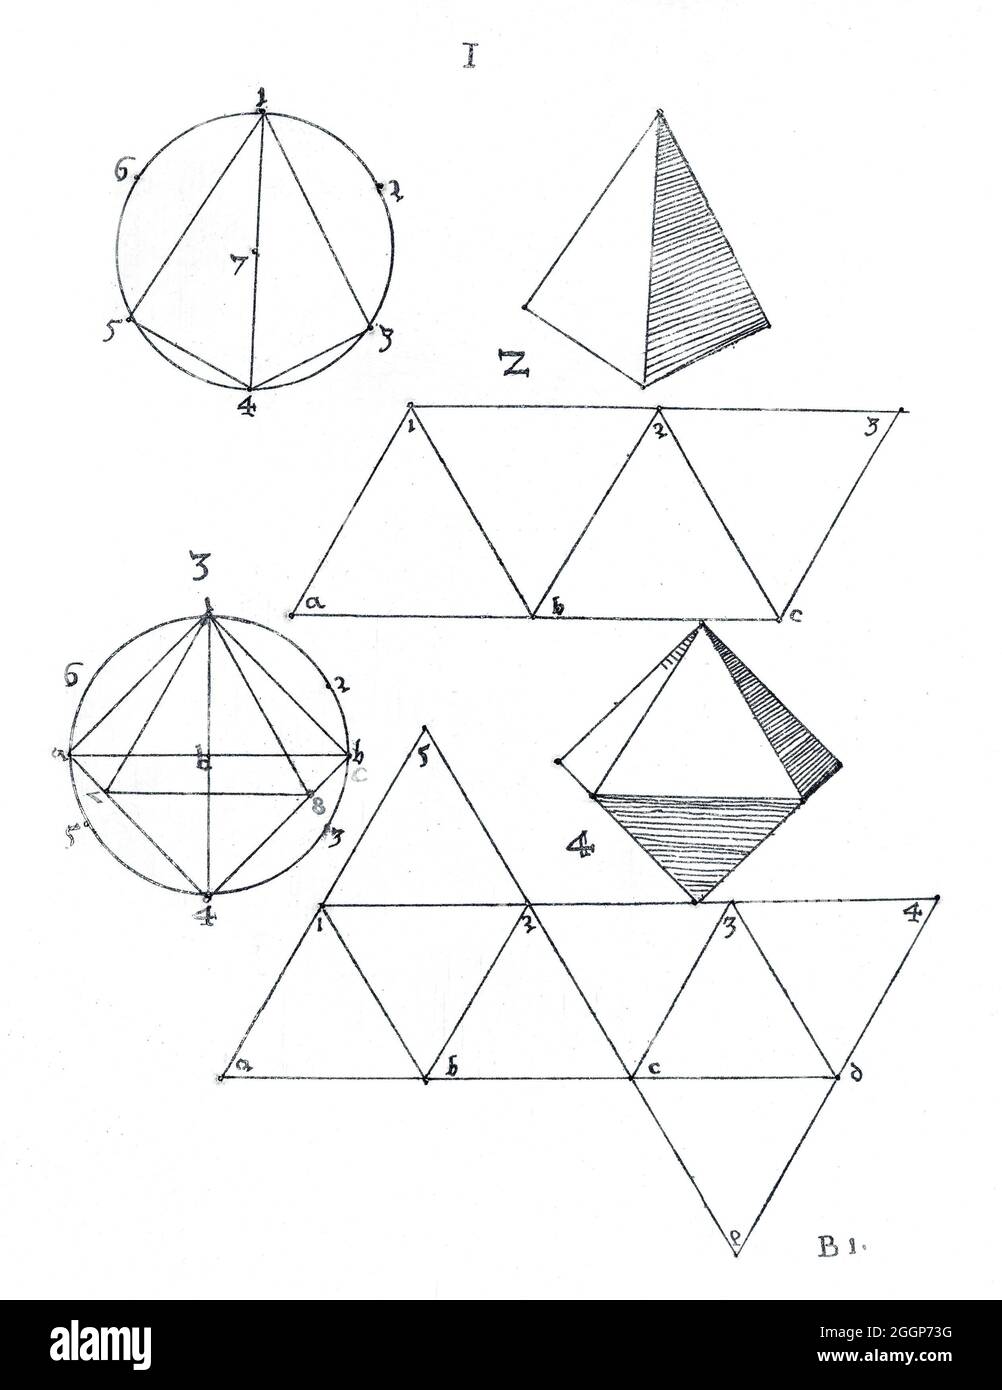 Polyhedral variations based on the five Platonic solids, or 'regular bodies': the tetrahedron, cube, octahedron, dodecahedron, and icosahedron. Stock Photo